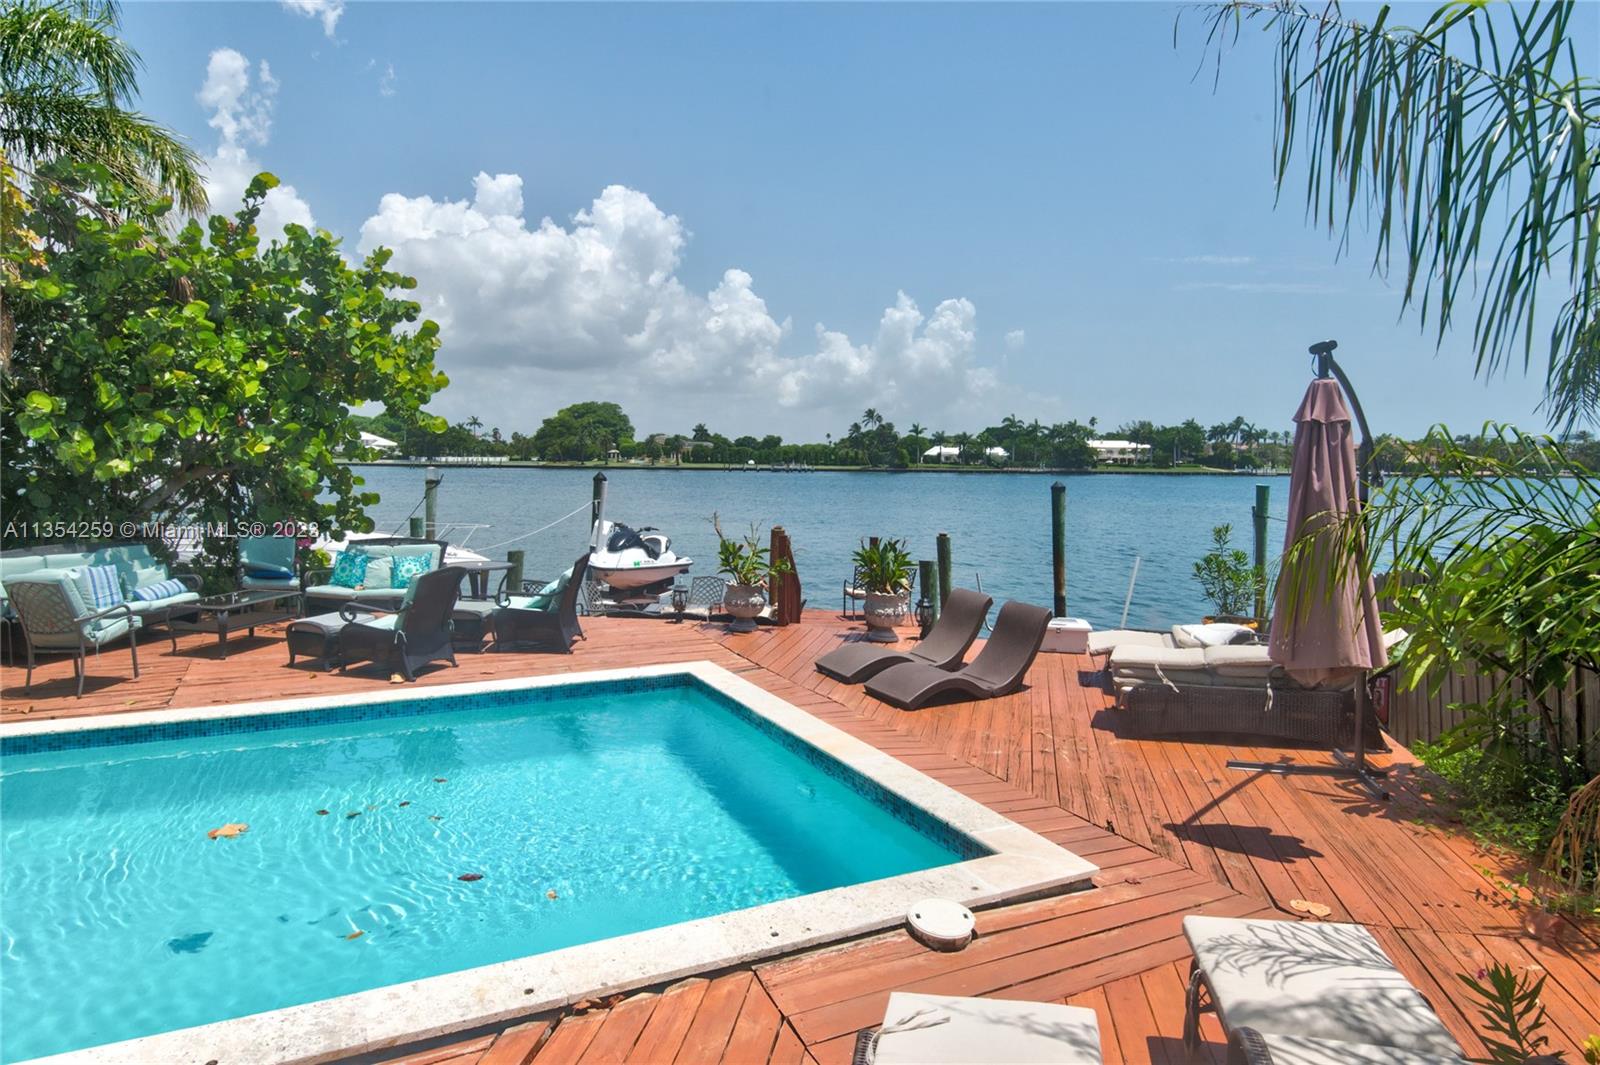 Waterfront 4/4 pool home with panoramic bay view on a private peninsula with a guard gate and a one car garage. Beautiful wide bay views with Indian creek mansions across the bay.